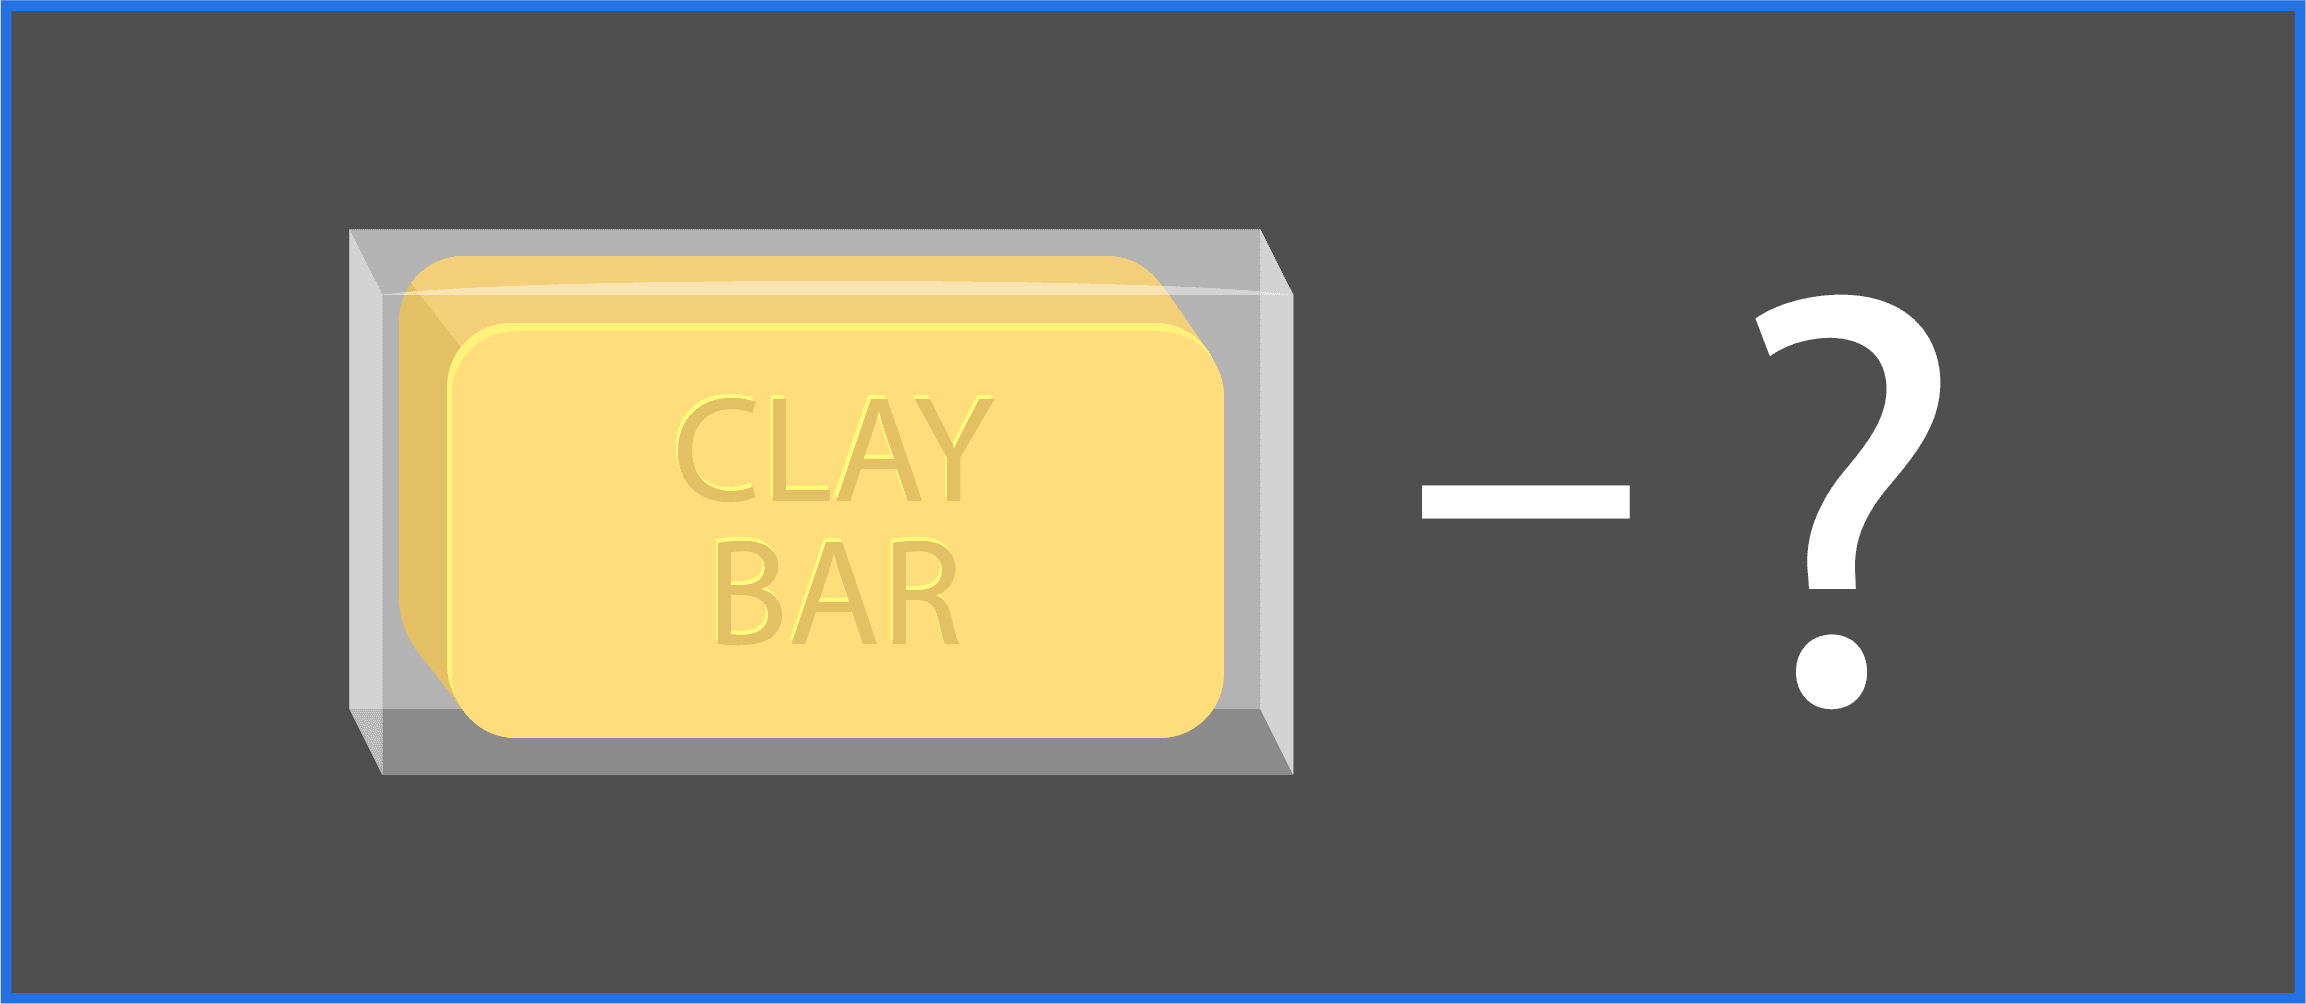 What is a Clay Bar Treatment